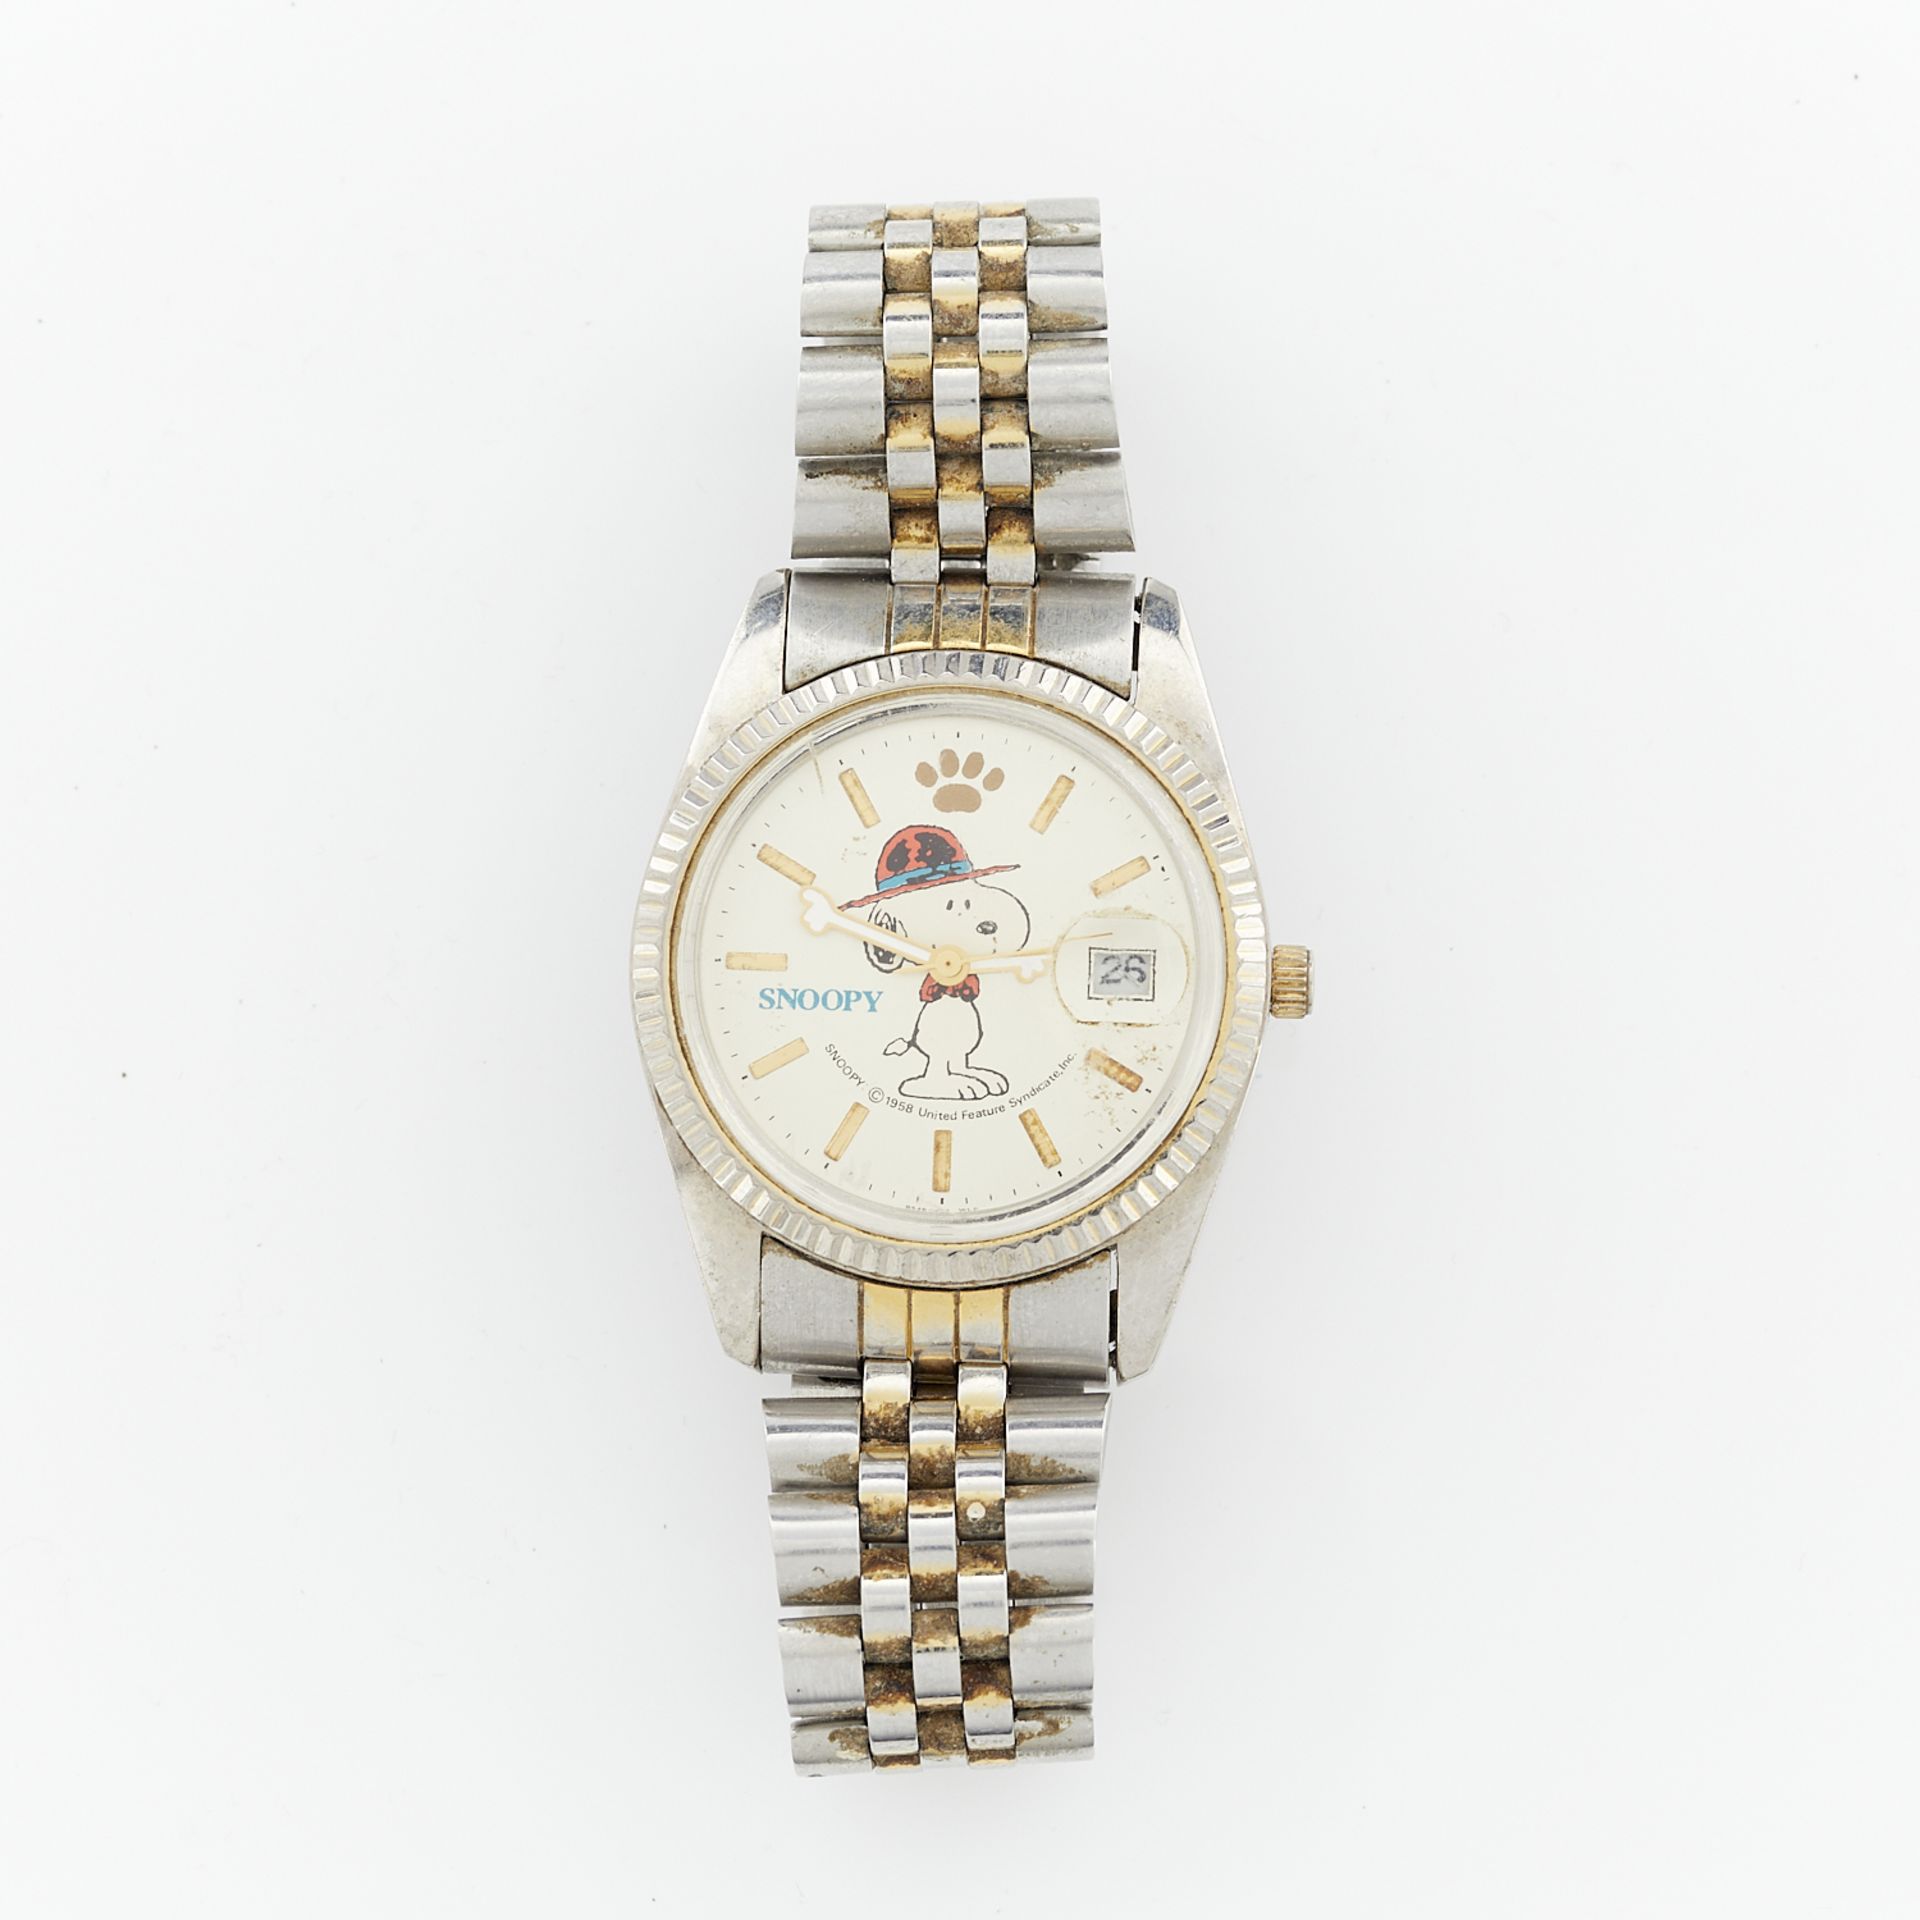 Crater Snoopy Wristwatch - Image 6 of 8